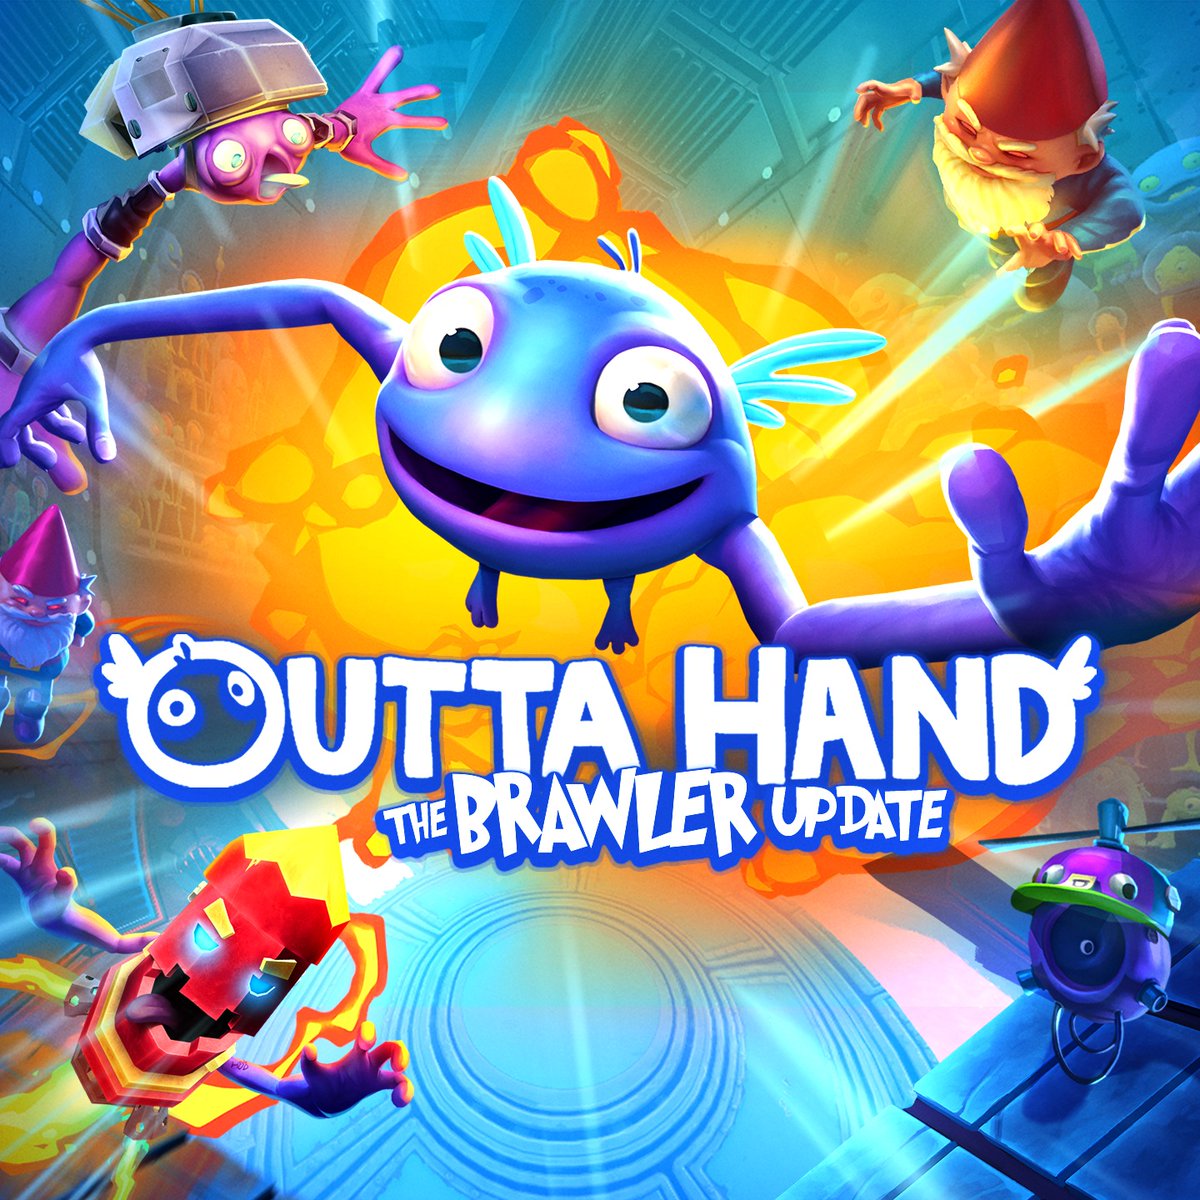 The Brawler Update for @OuttaHandVR is out NOW and if you're new to the game, it's on a rockin' 25% discount! 👉🛒 vr.meta.me/s/1GcL7EDQSVqV… #OuttaHandVR #MetaQuest #VR #VRGaming